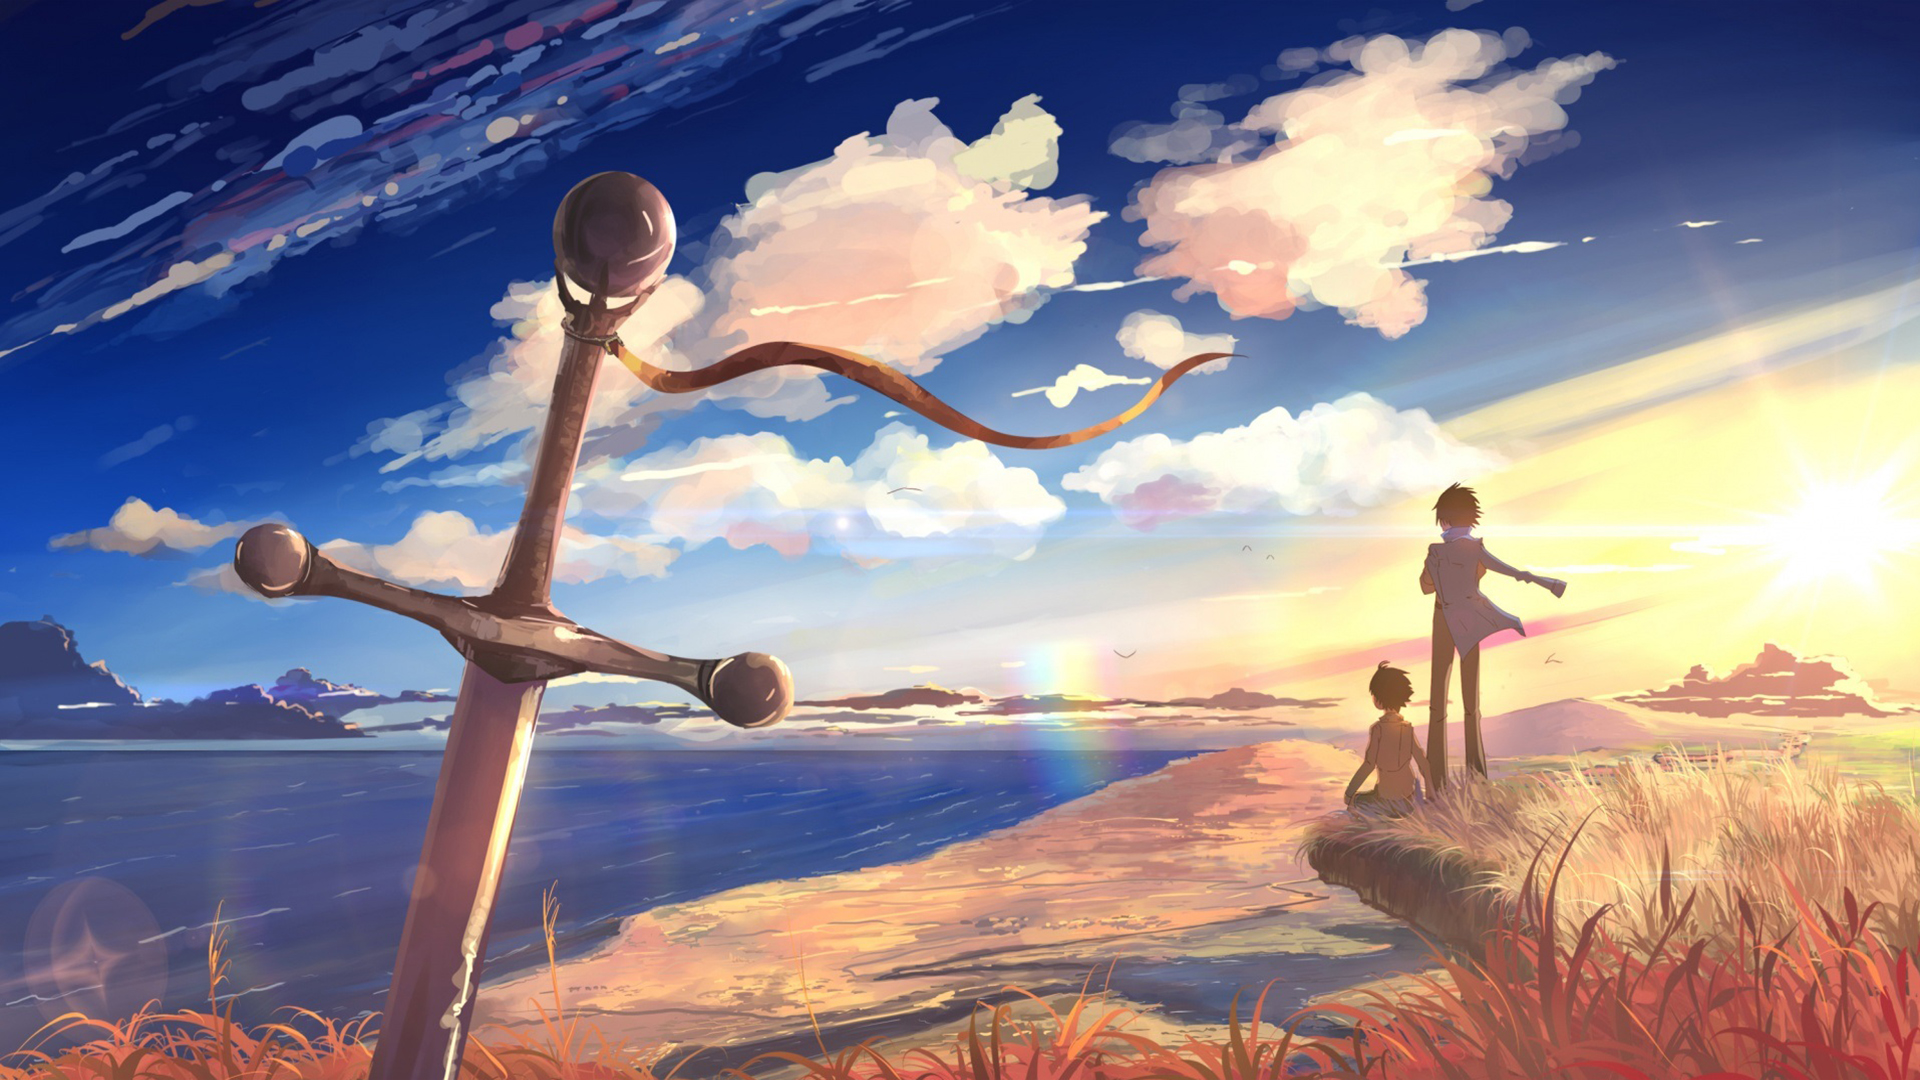 animes wallpapers full hd,sky,natural landscape,cloud,illustration,happy